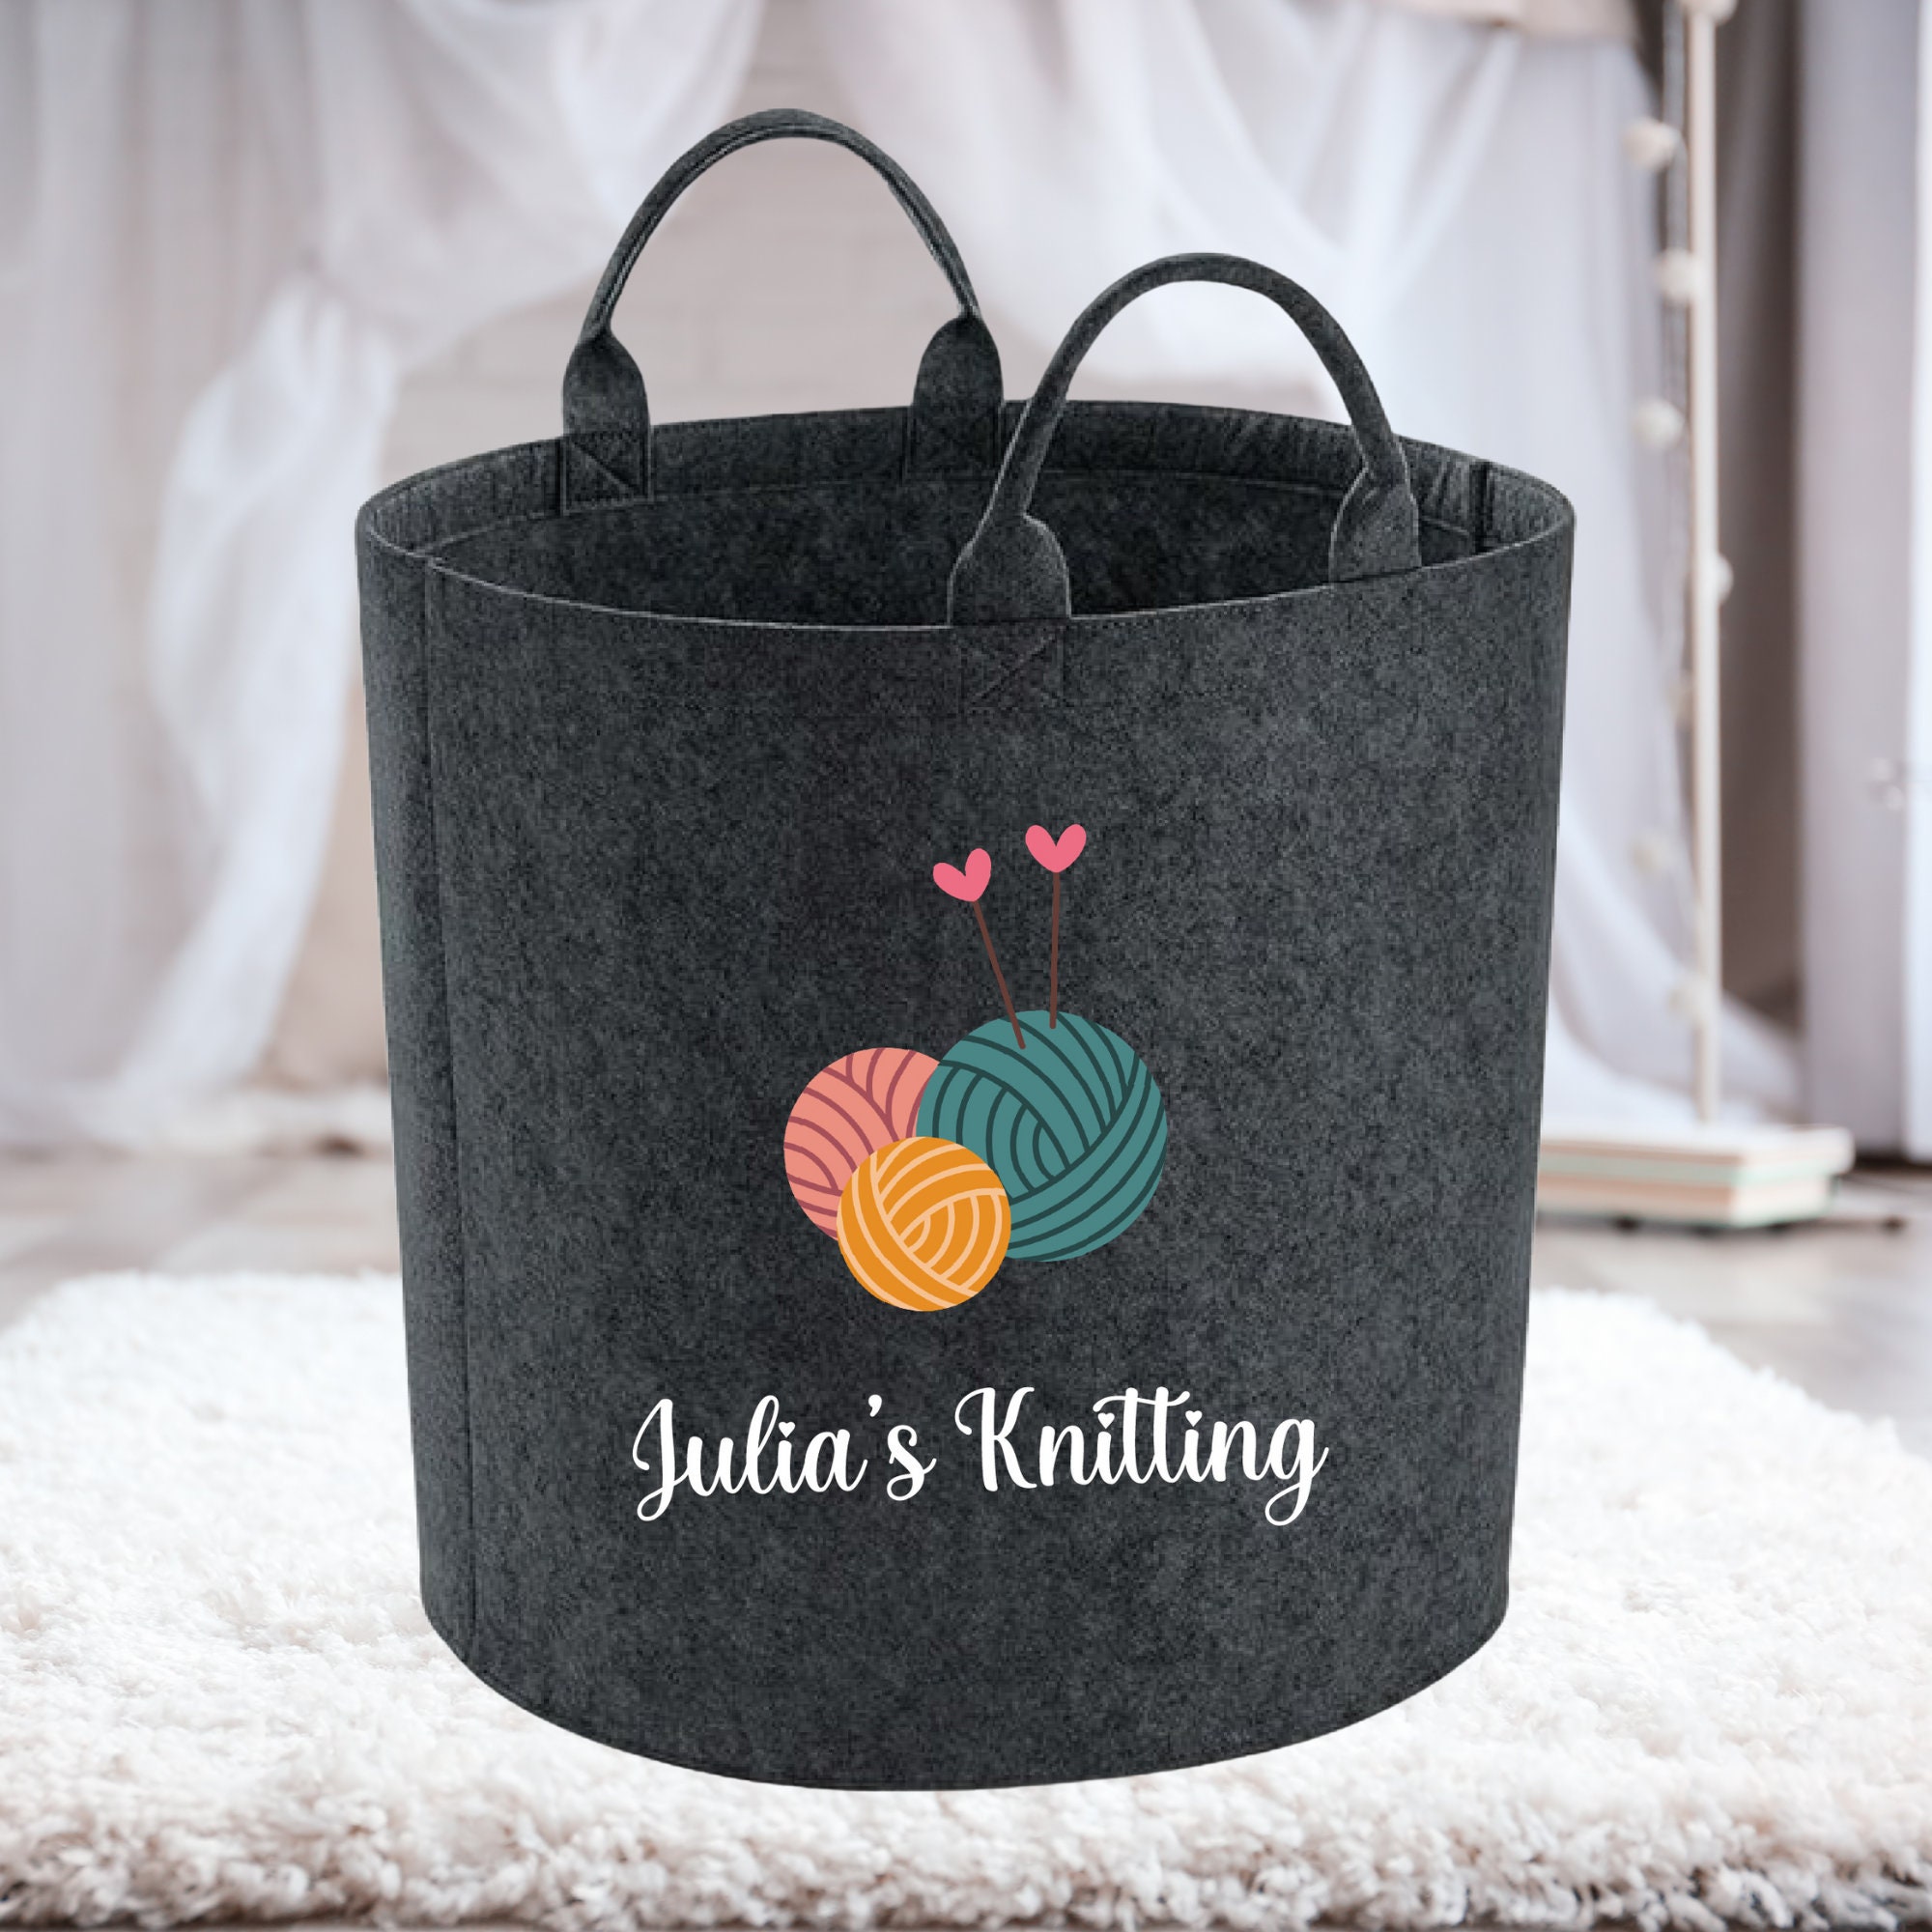 Lavievert Knitting Tote Bag Yarn Storage Bag for Carrying Projects Knitting Needles Crochet Hooks and Other Accessories